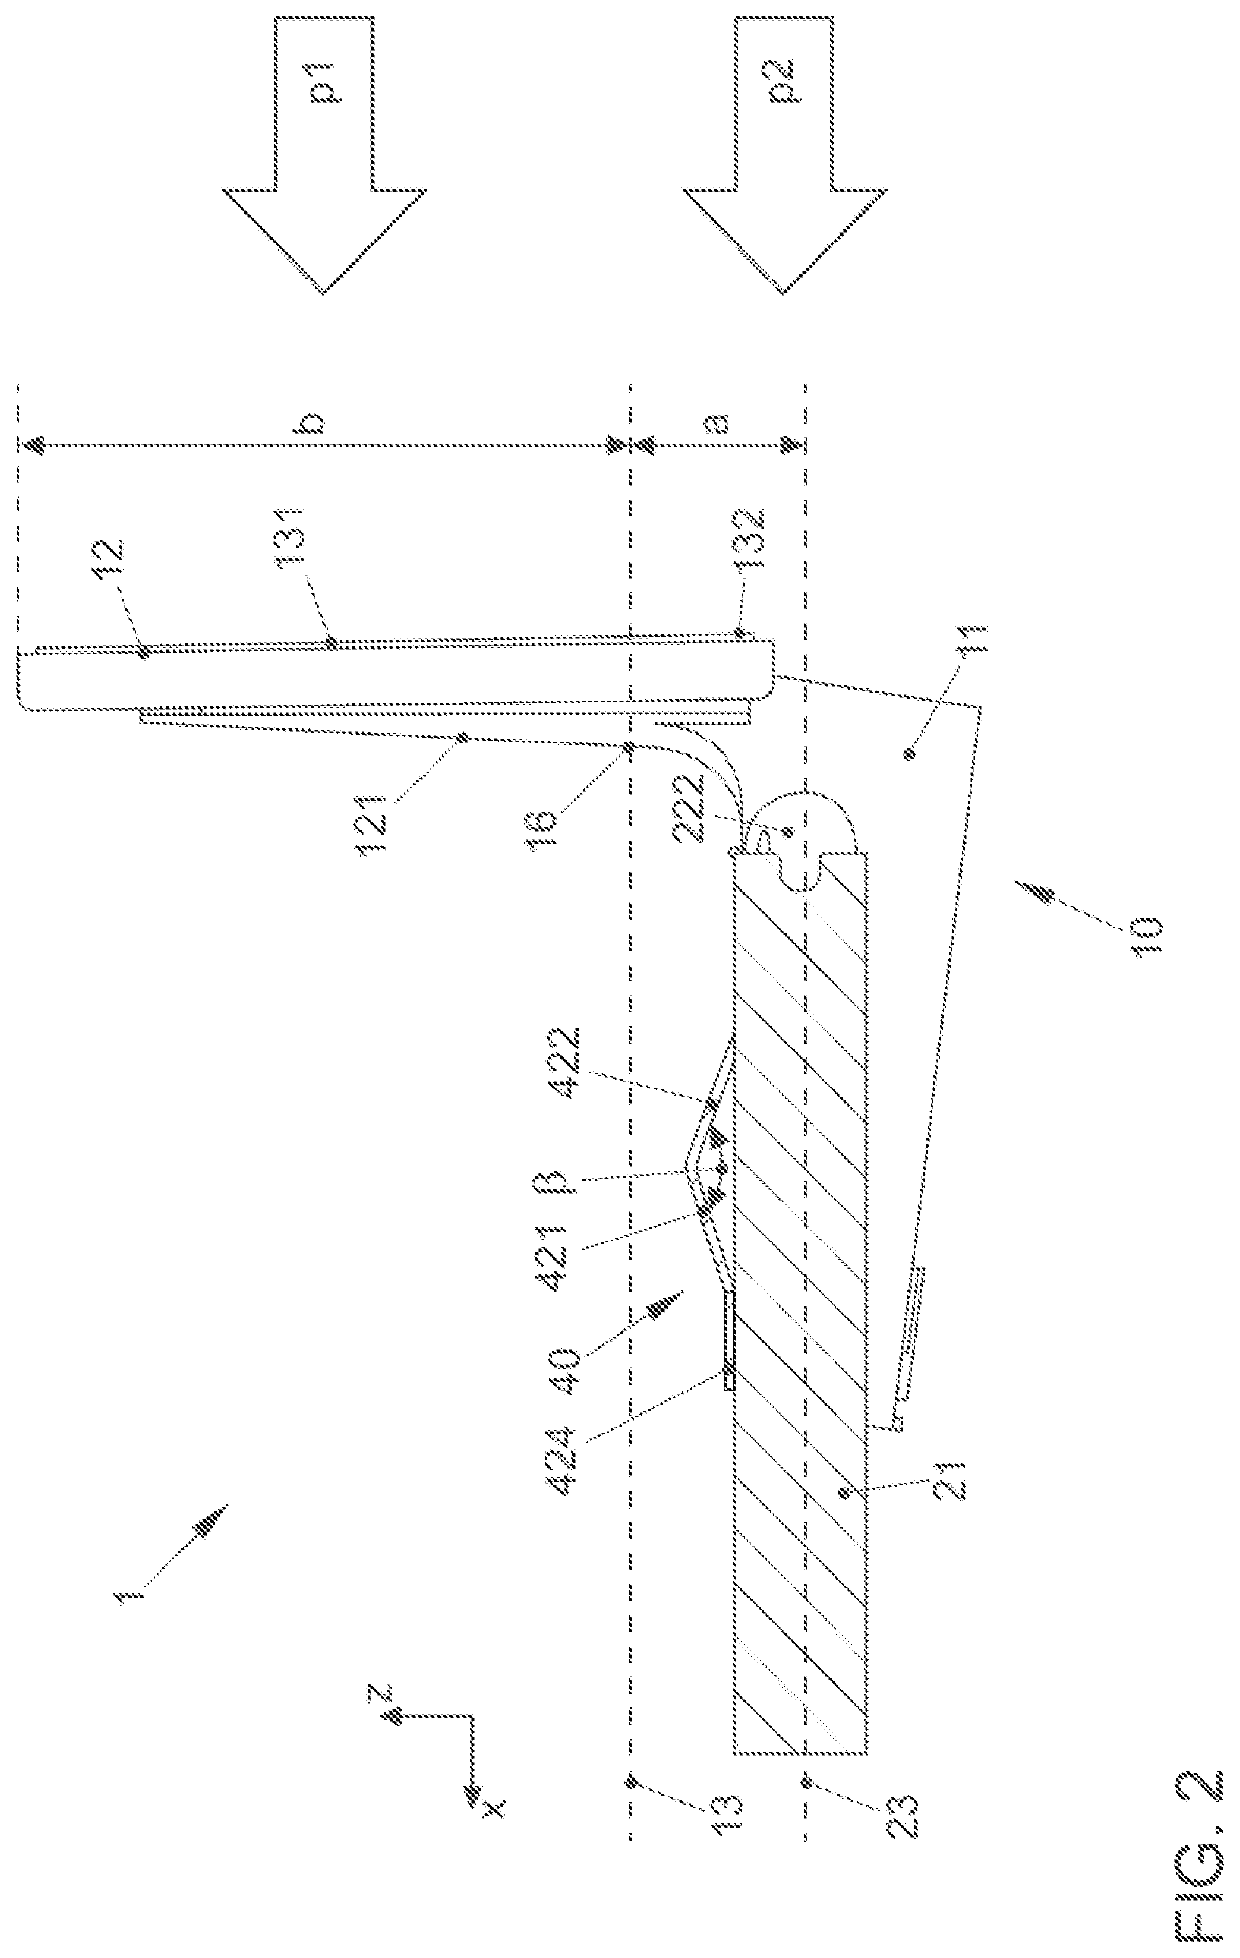 Positioning system for positioning a display device in a motor vehicle, and a motor vehicle